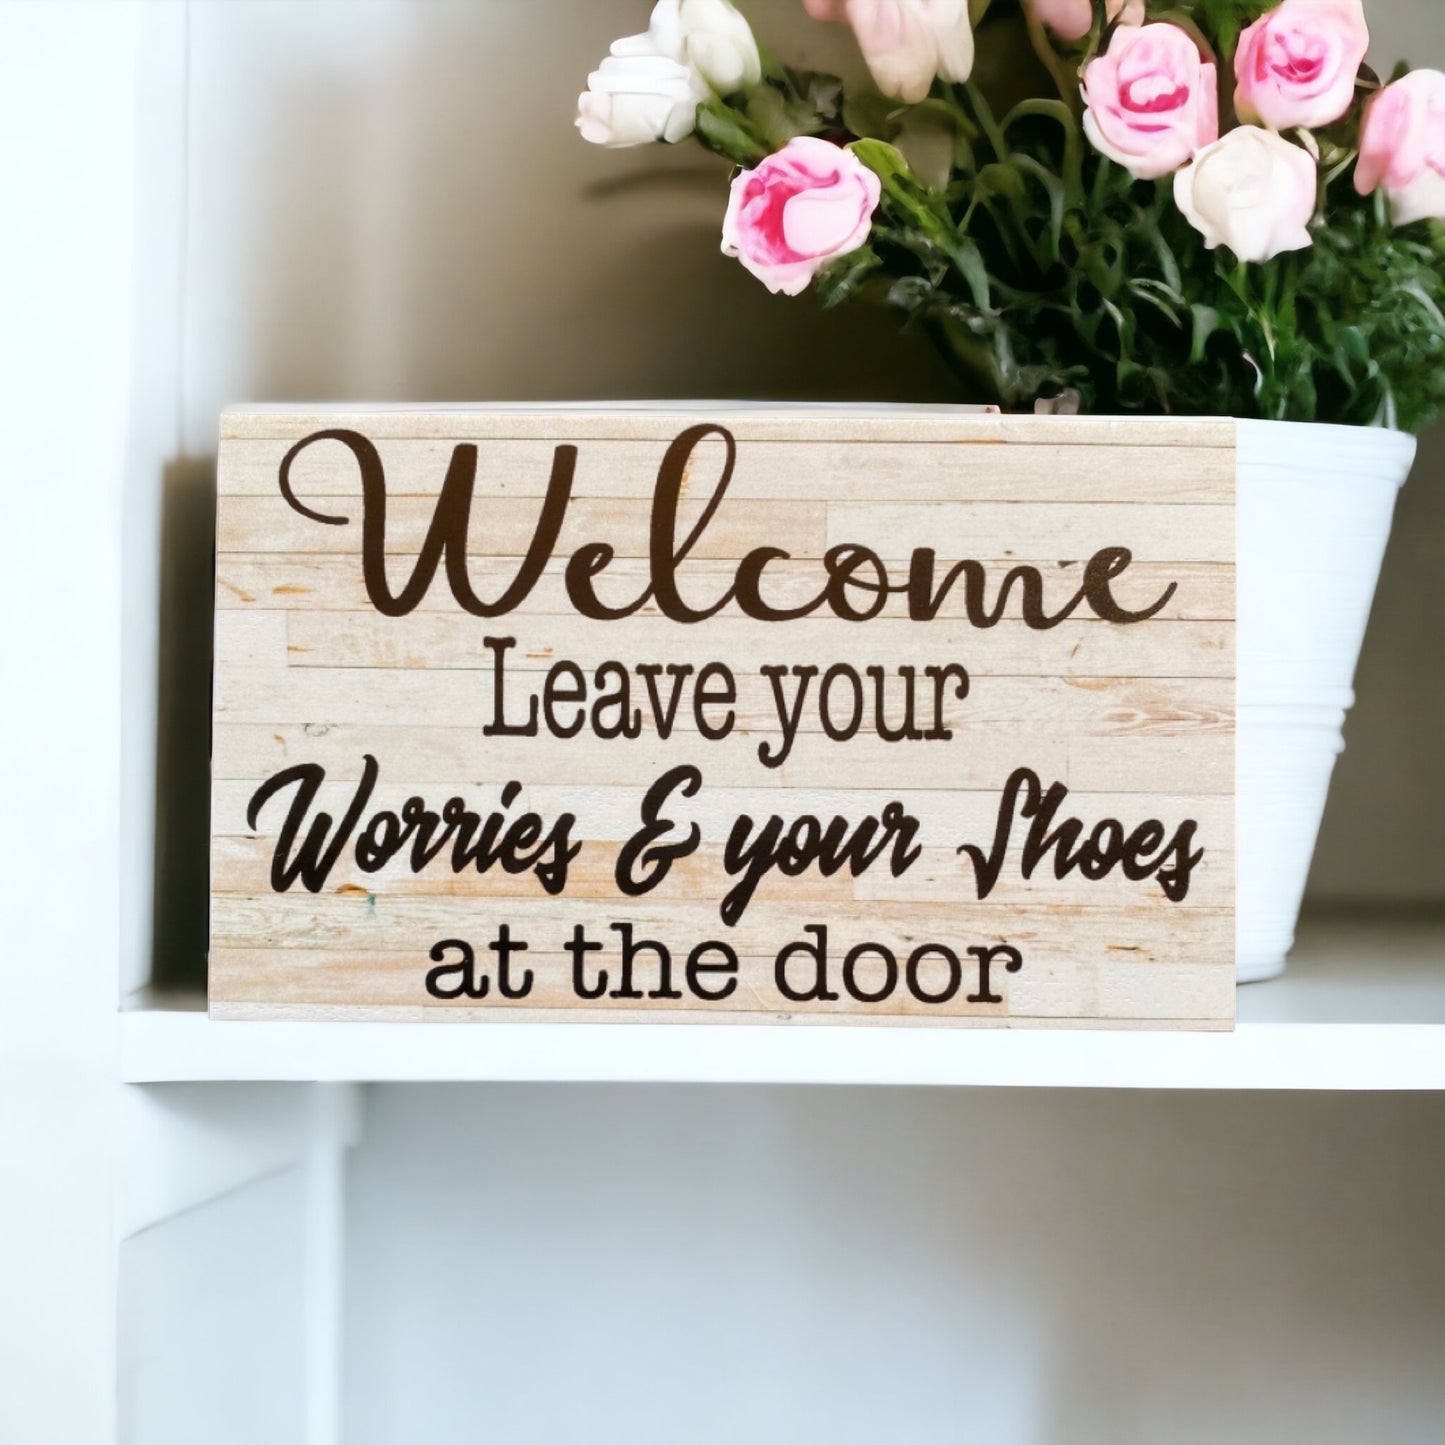 Welcome Leave Your Worries Shoes At The Door French Sign - The Renmy Store Homewares & Gifts 